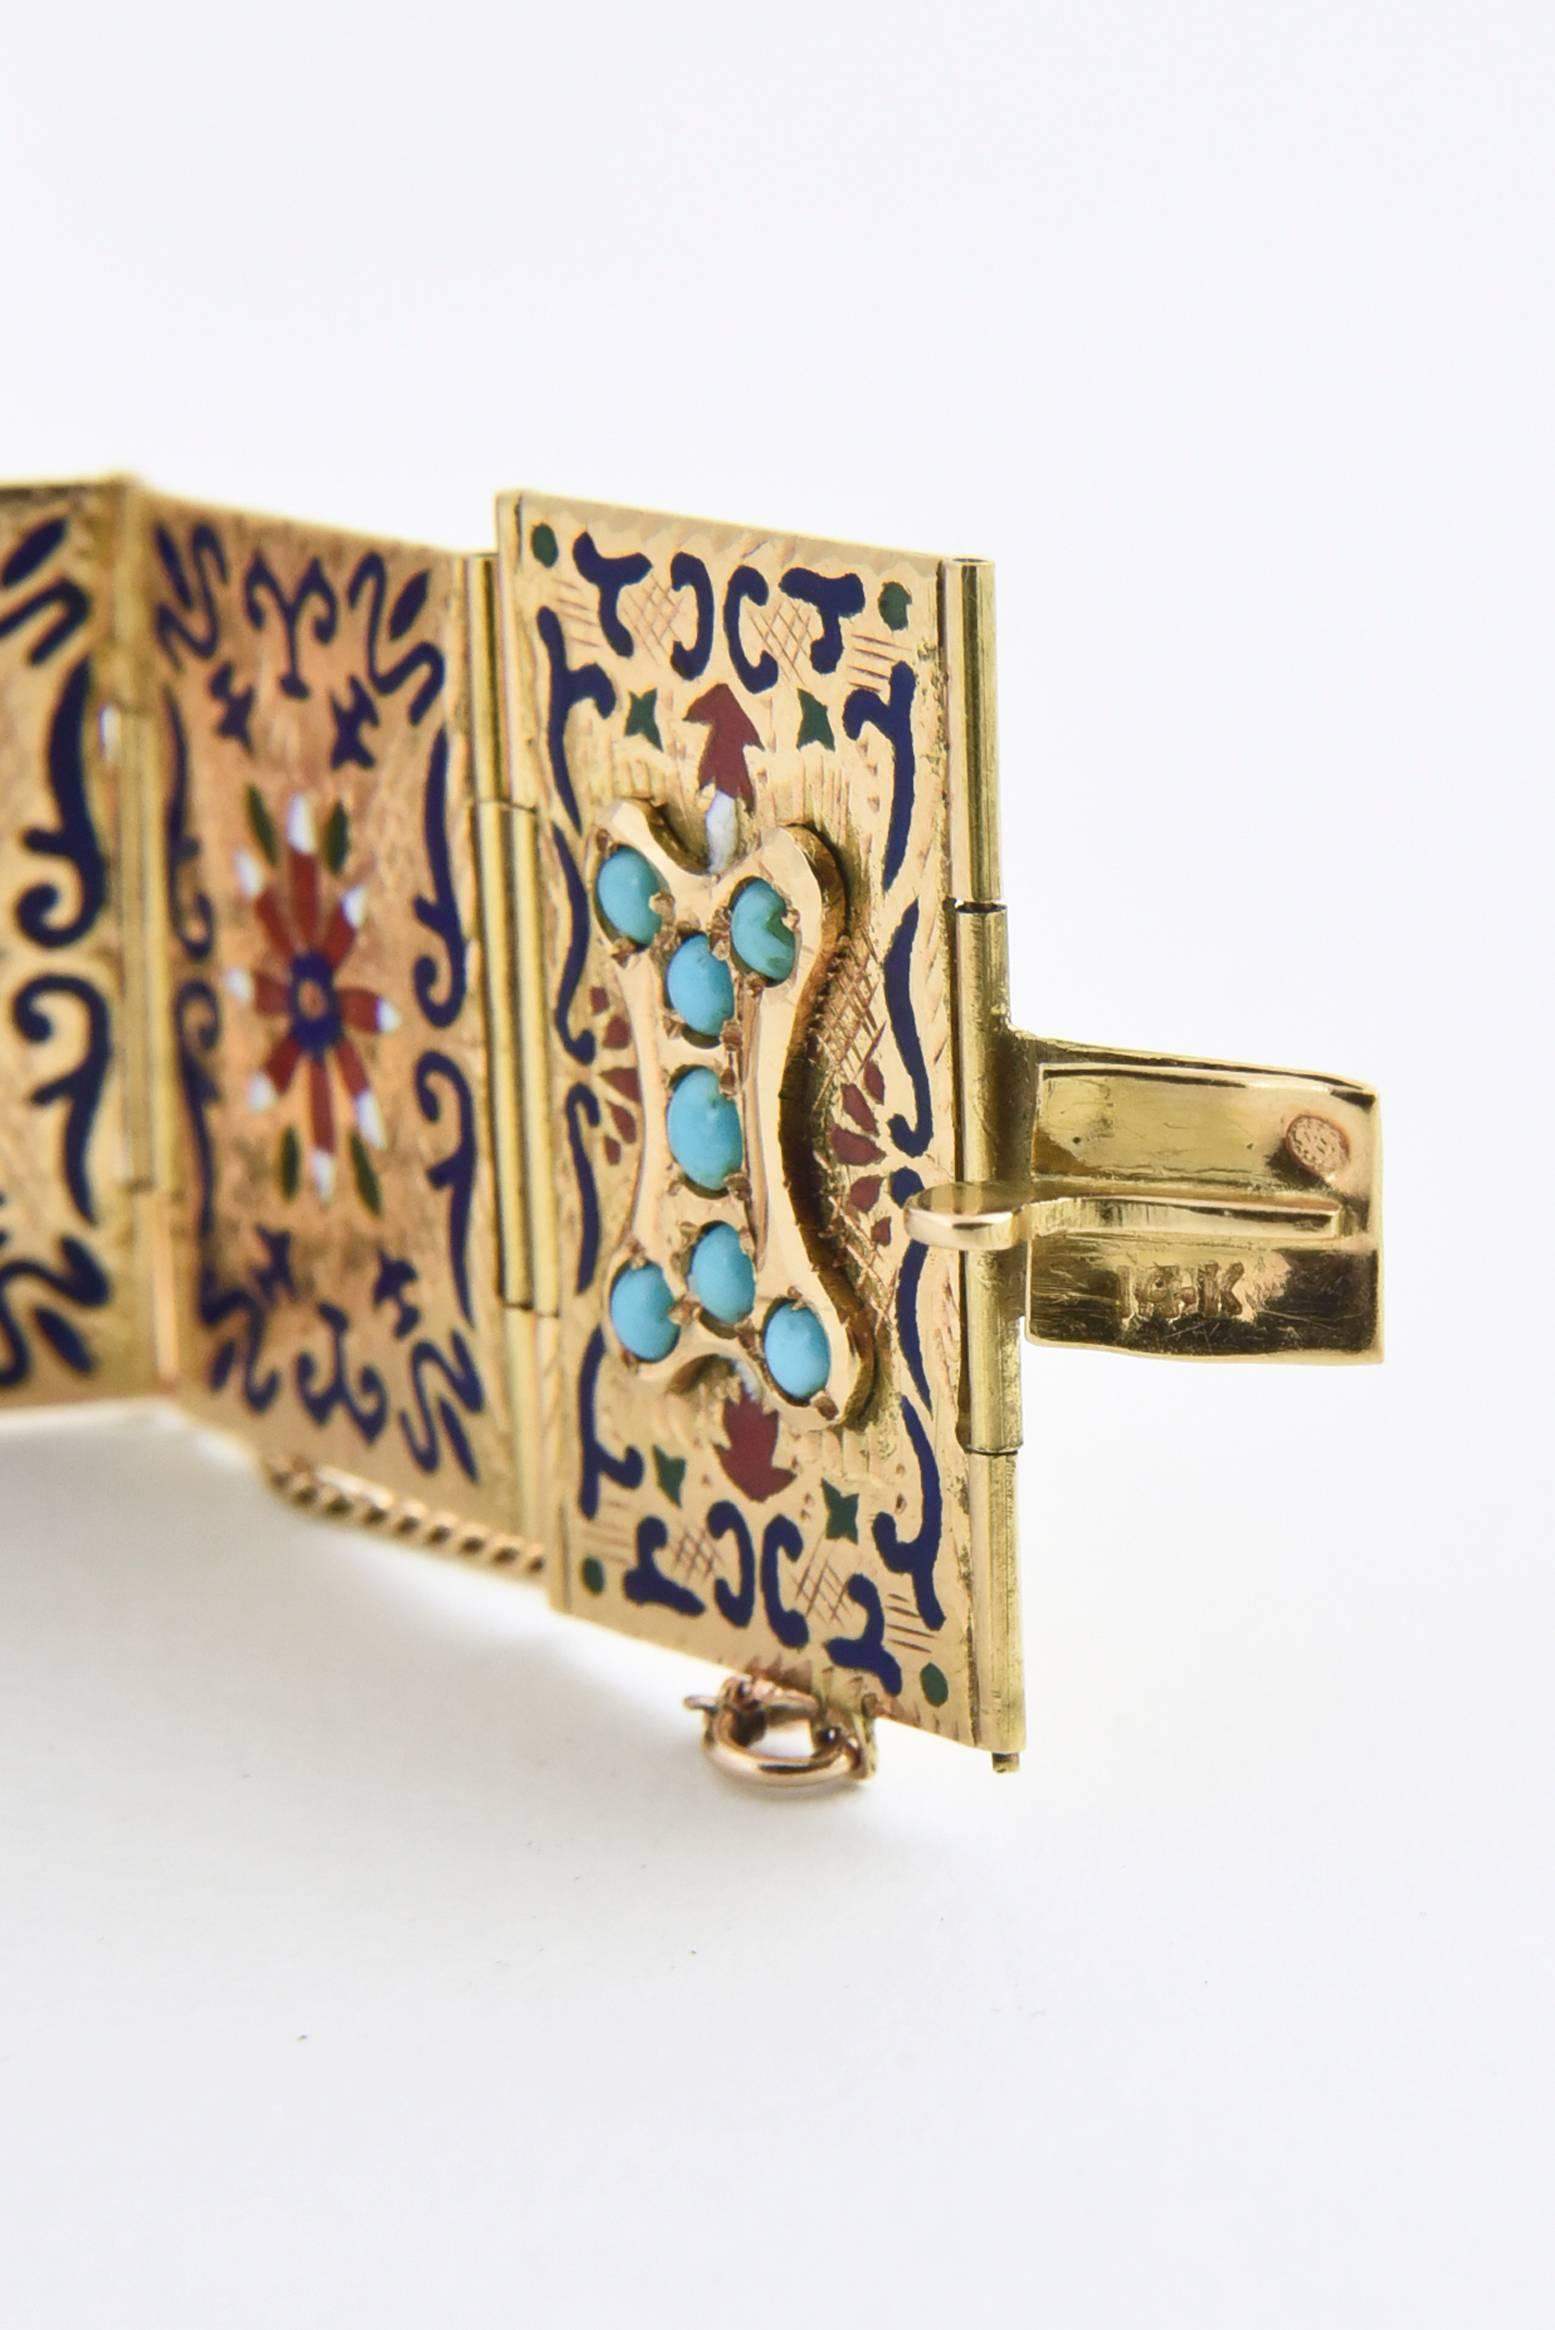 Women's Early 20th Century Renaissance Revival Enameled and Jewelled Gold Book Bracelet